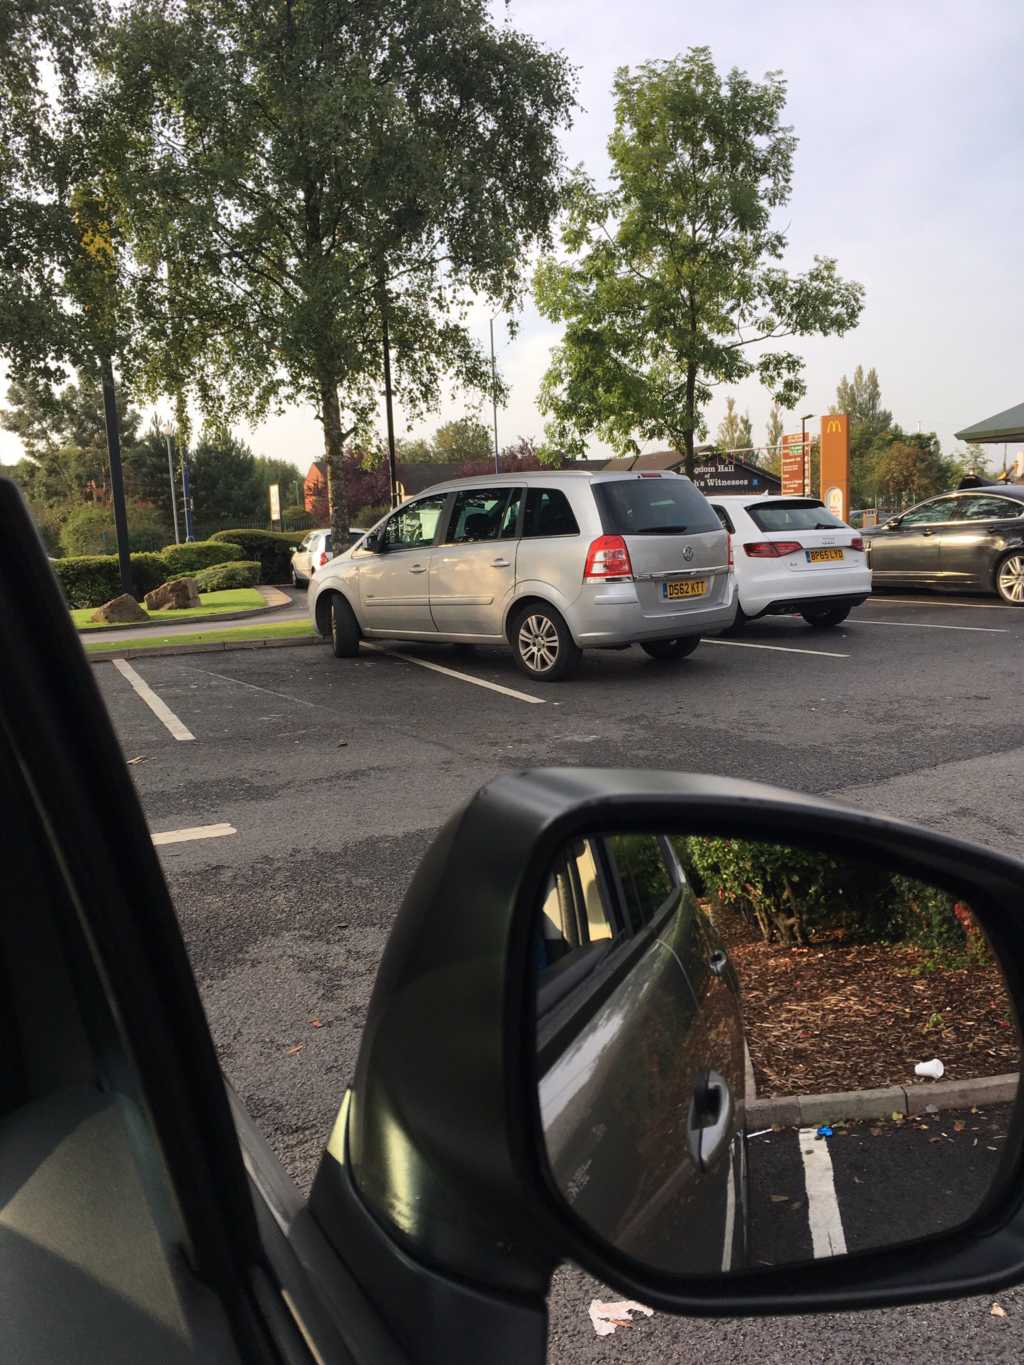 DS62 KTT displaying Inconsiderate Parking